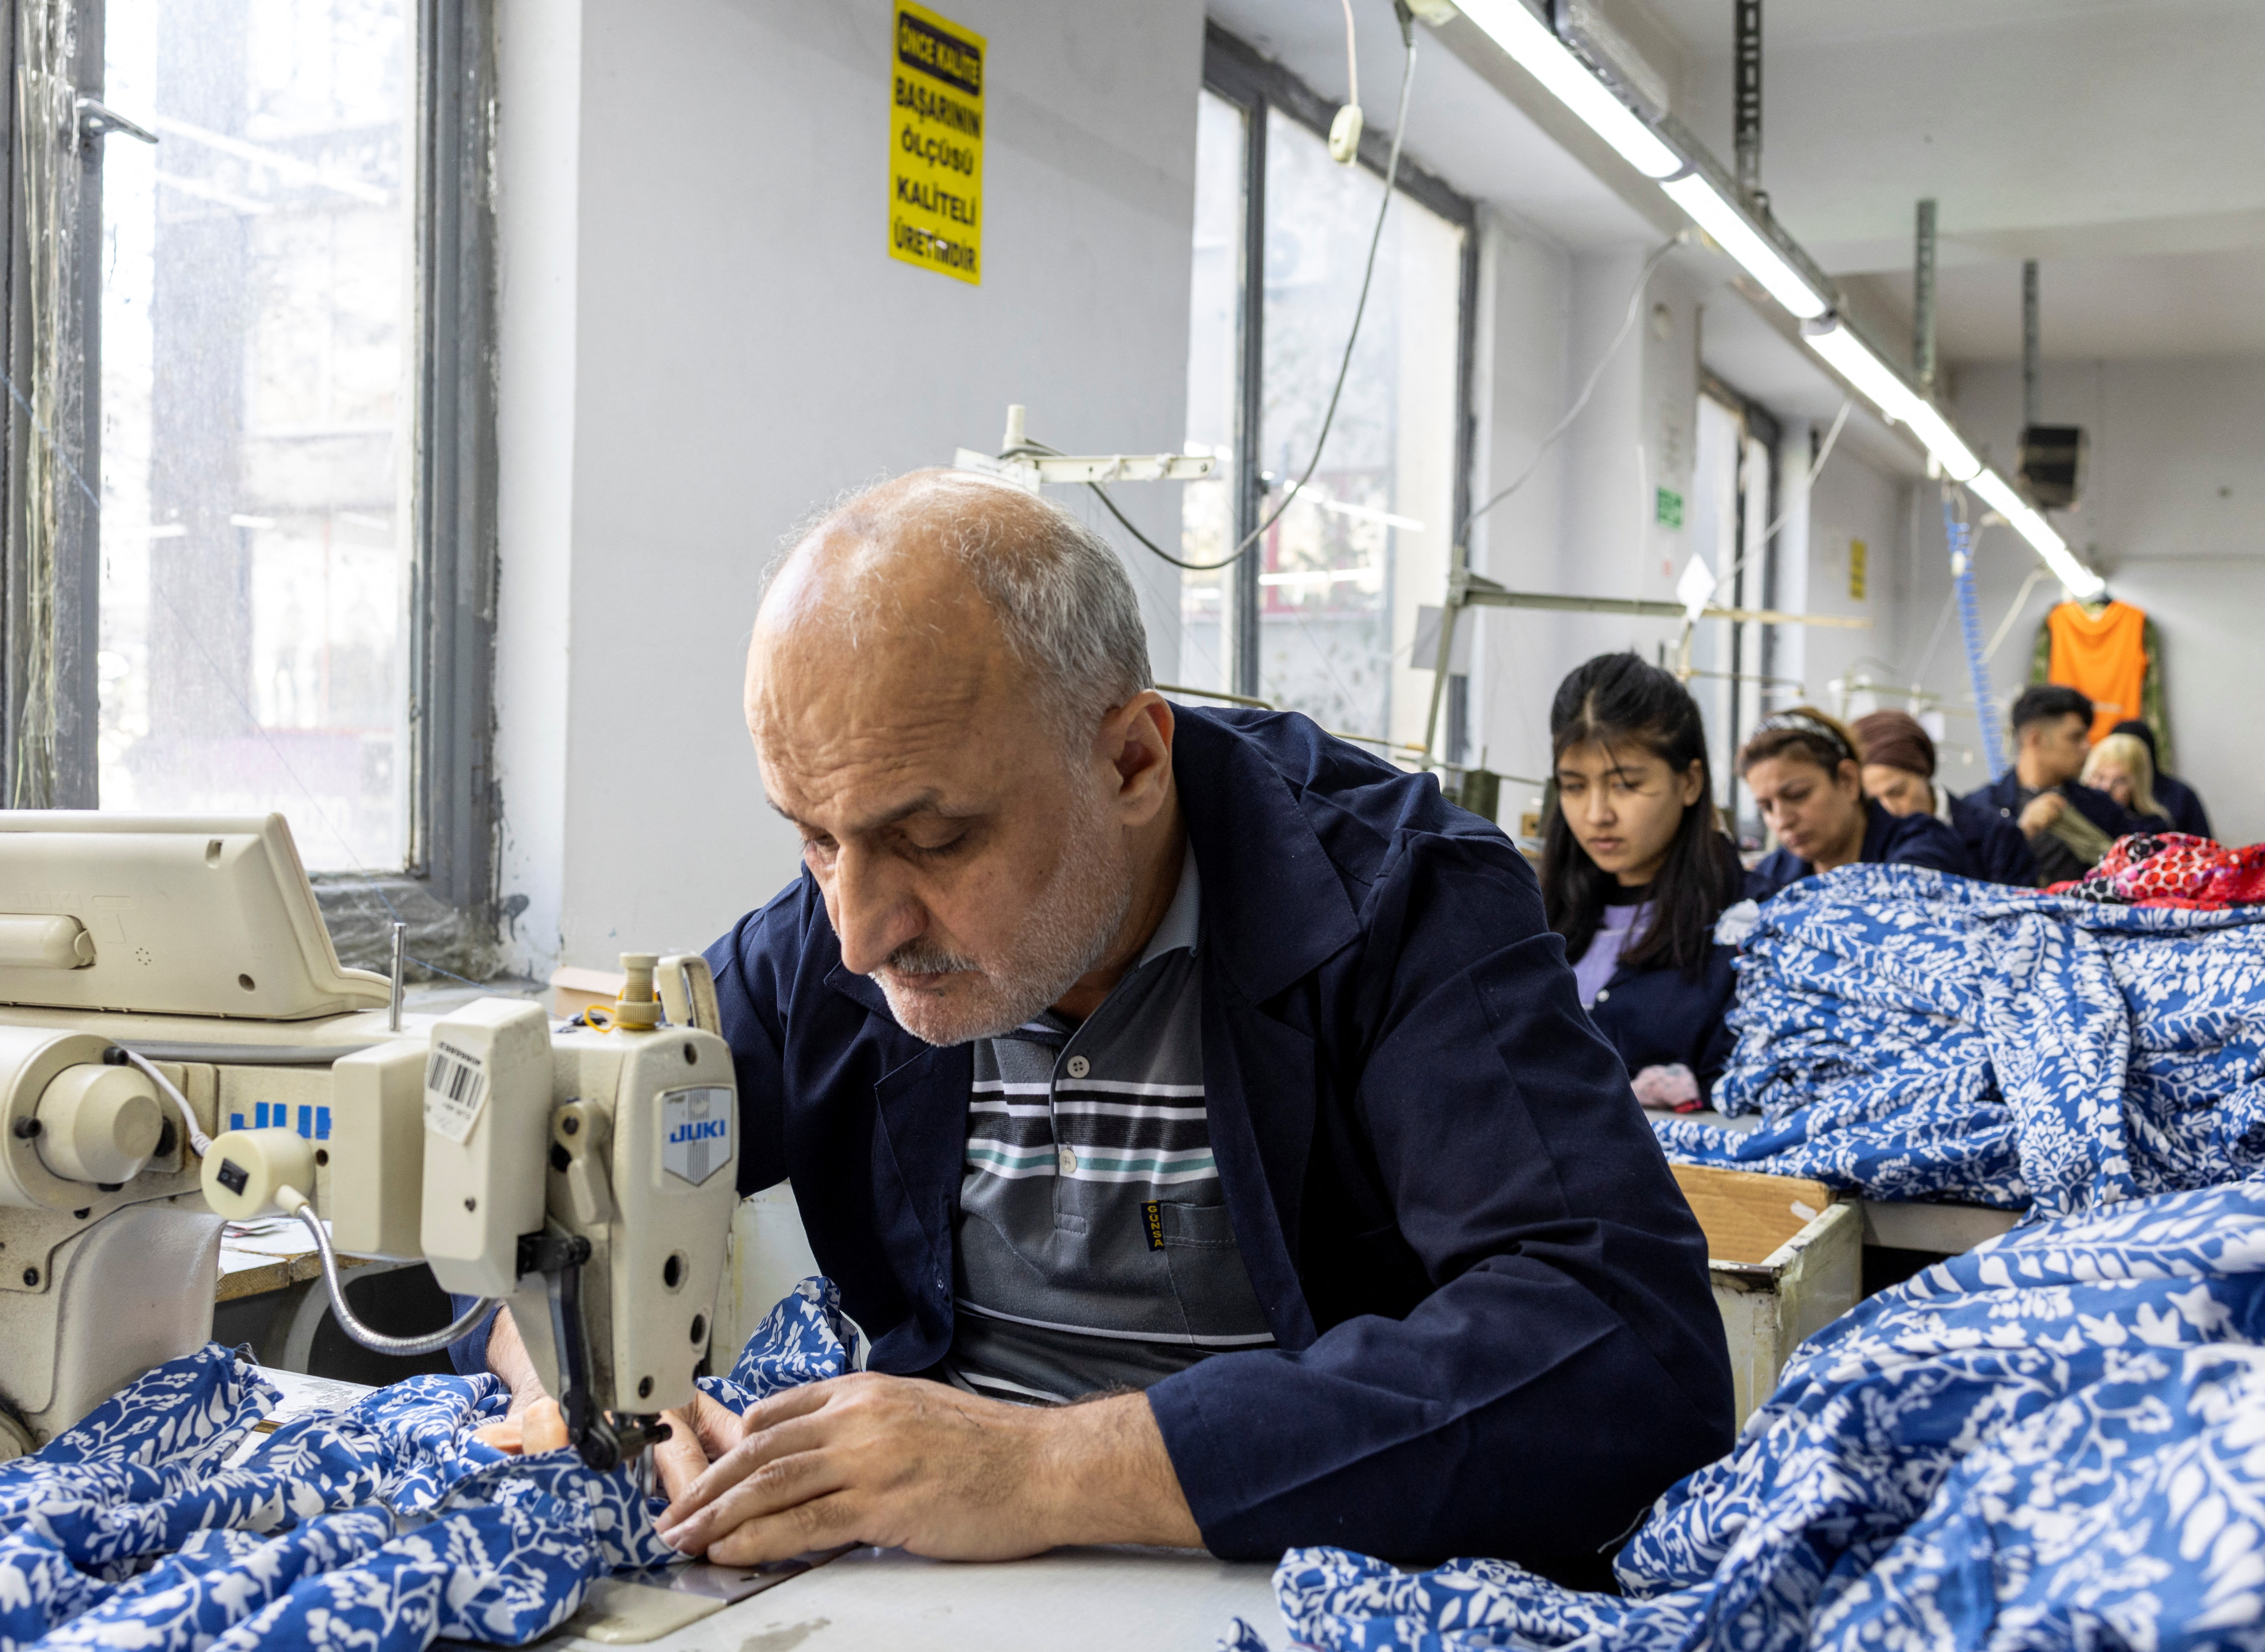 Turkey's clothing makers face rising costs from push to help